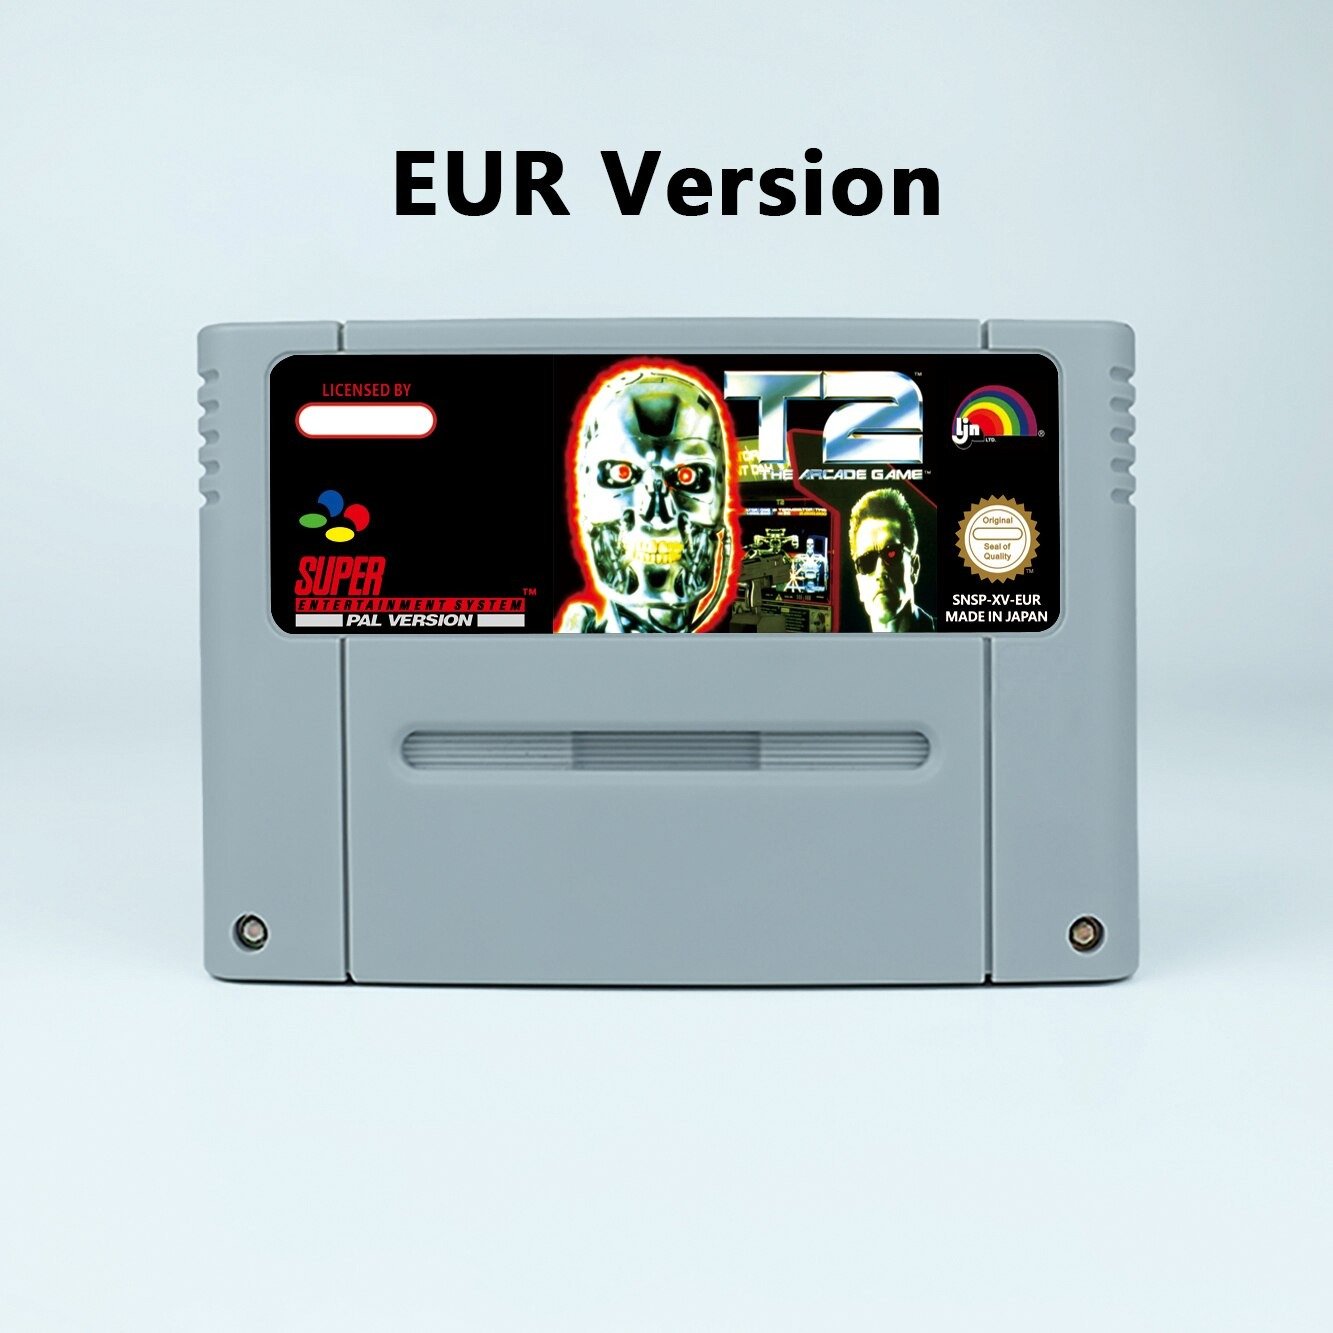 T2 - The Arcade Game Action Game EUR Version Cartridge available for SNES Game Consoles